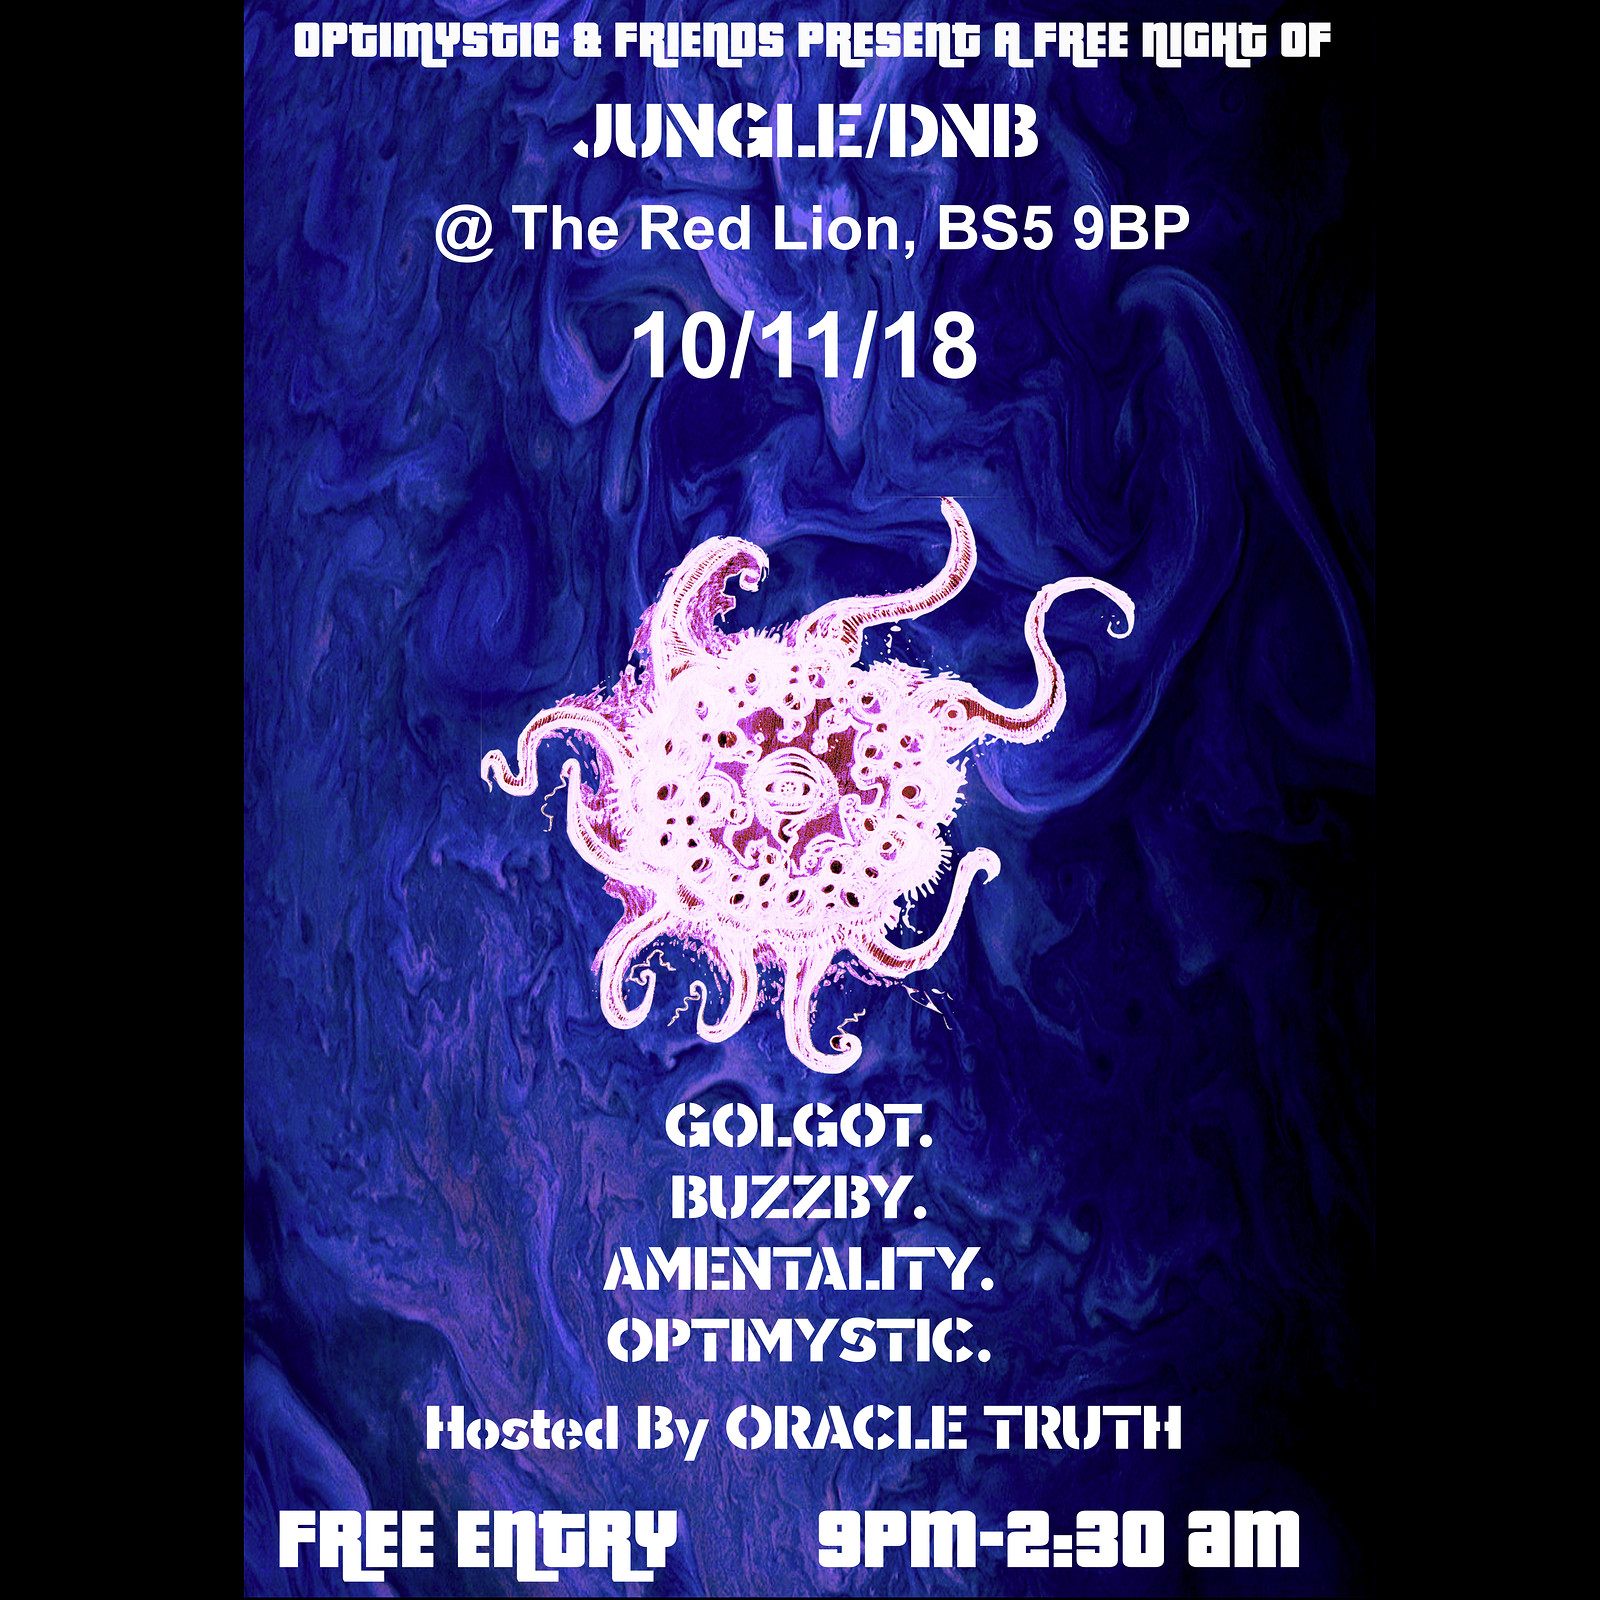 Optimystic & Friends Free Jungle/dnb Session 15 at The Red Lion BS5